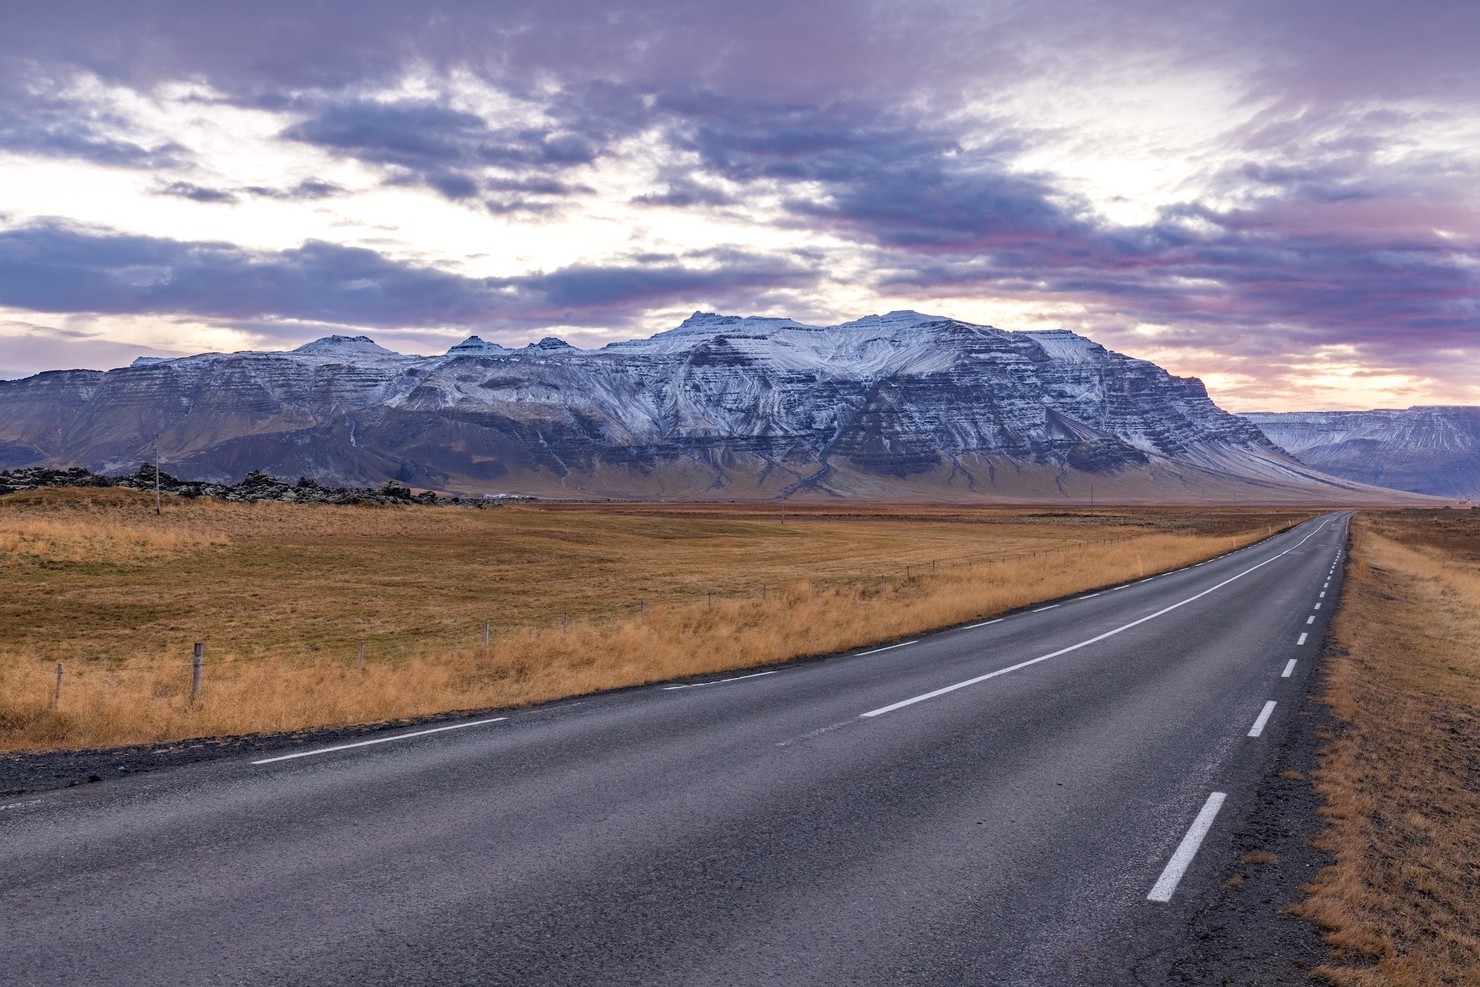 An Icelandic road stretching into the distance. In the background is a huge, snow-capped mountain.